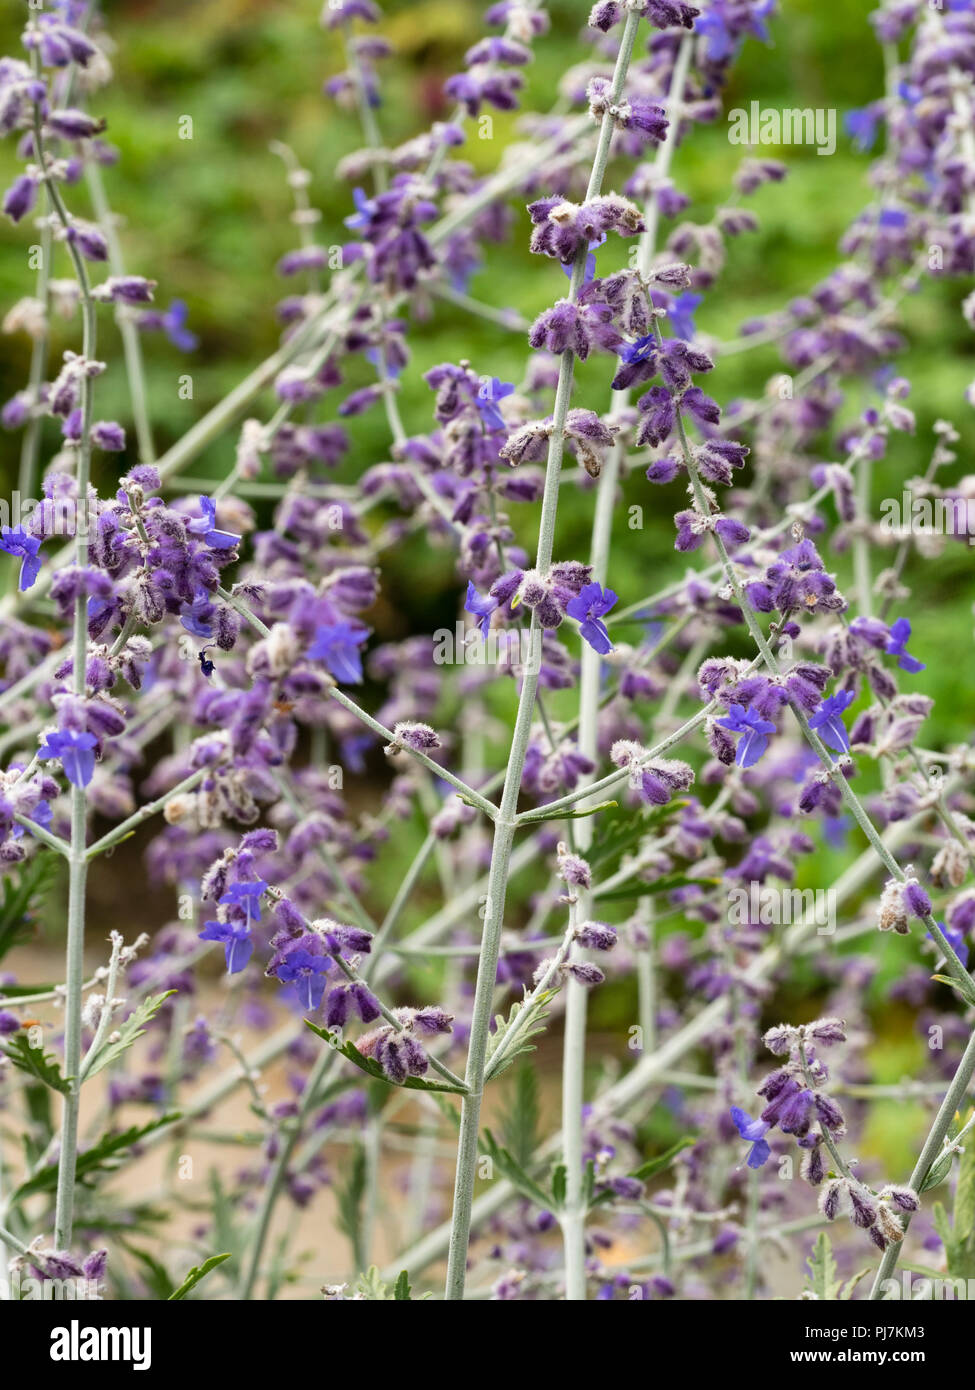 Airy, tangled stems bearing late summer blue flowers of the Russian sage, Perovskia atriplicifolia 'Blue Spire' Stock Photo